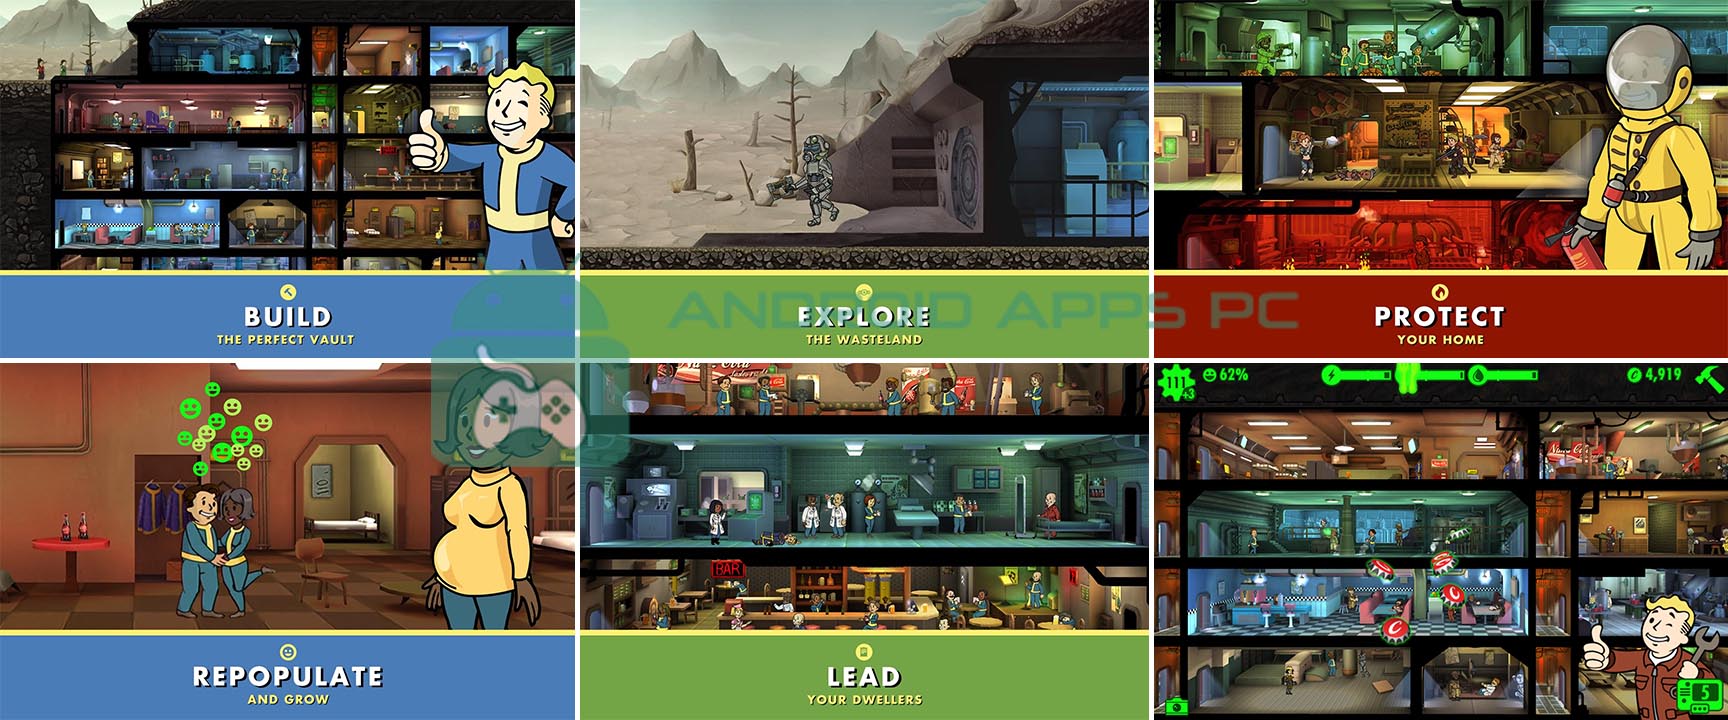 How to download fallout shelter on mac windows 10